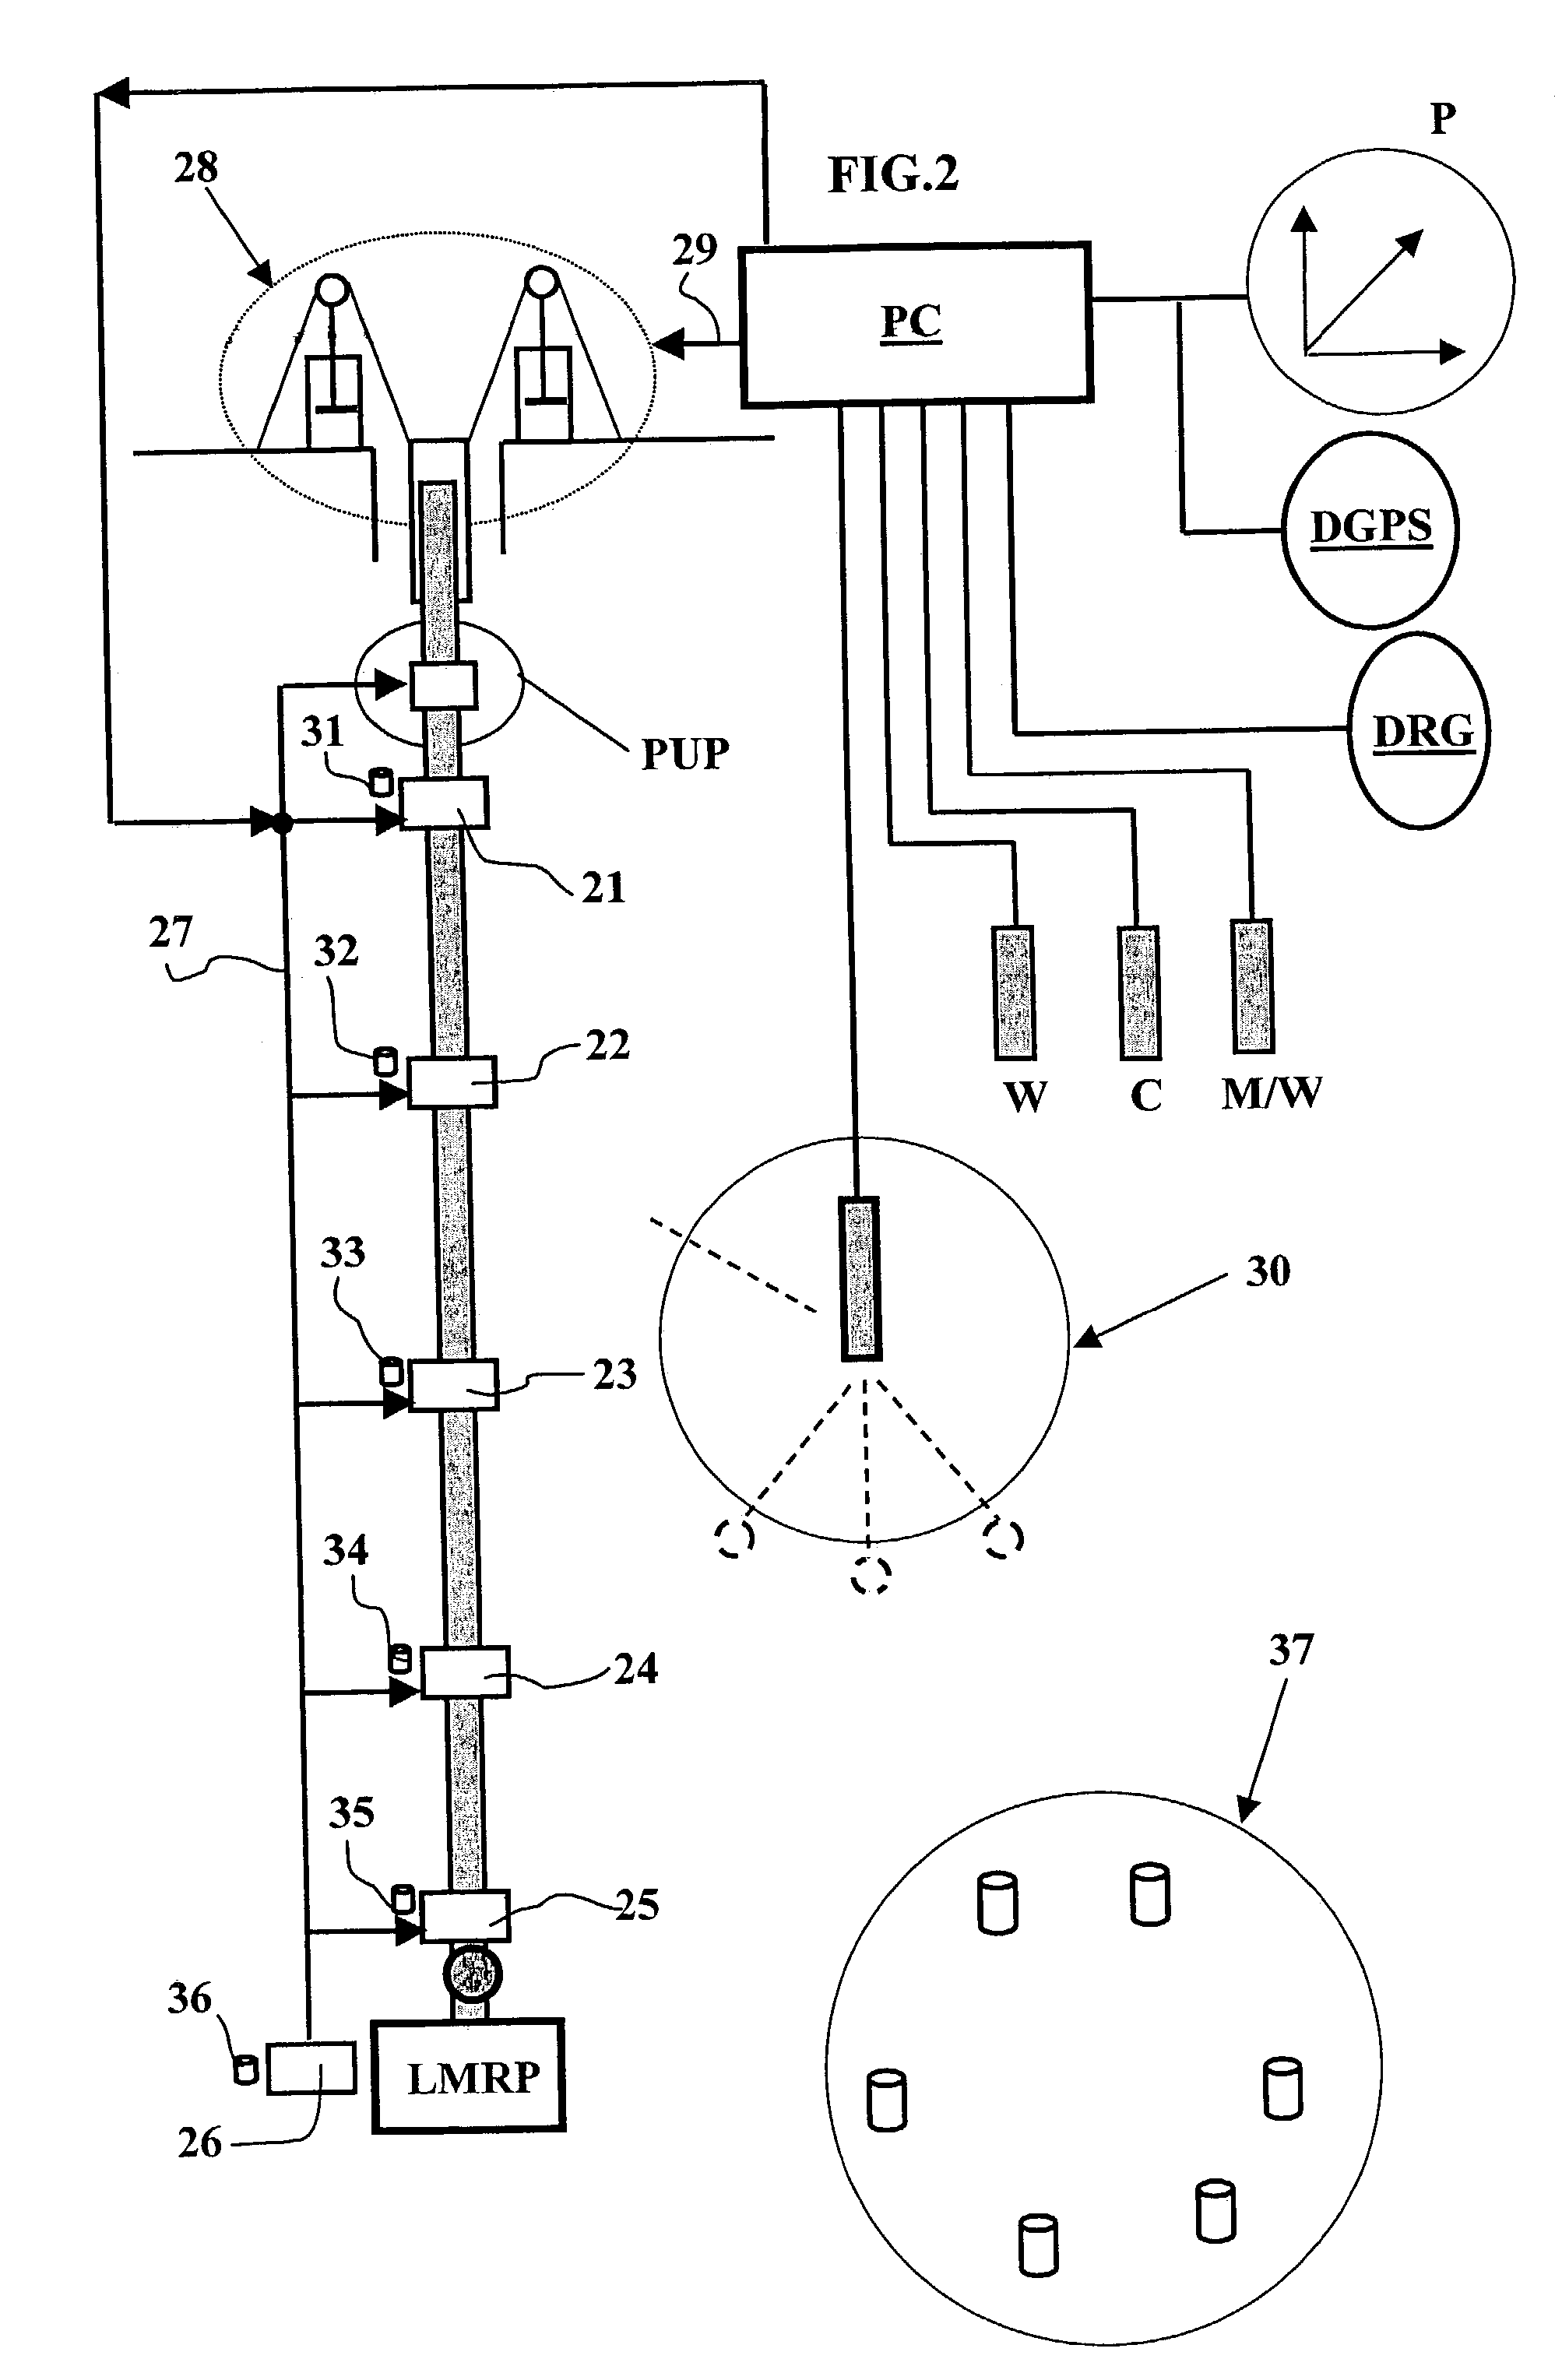 Instrumentation assembly for an offshore riser